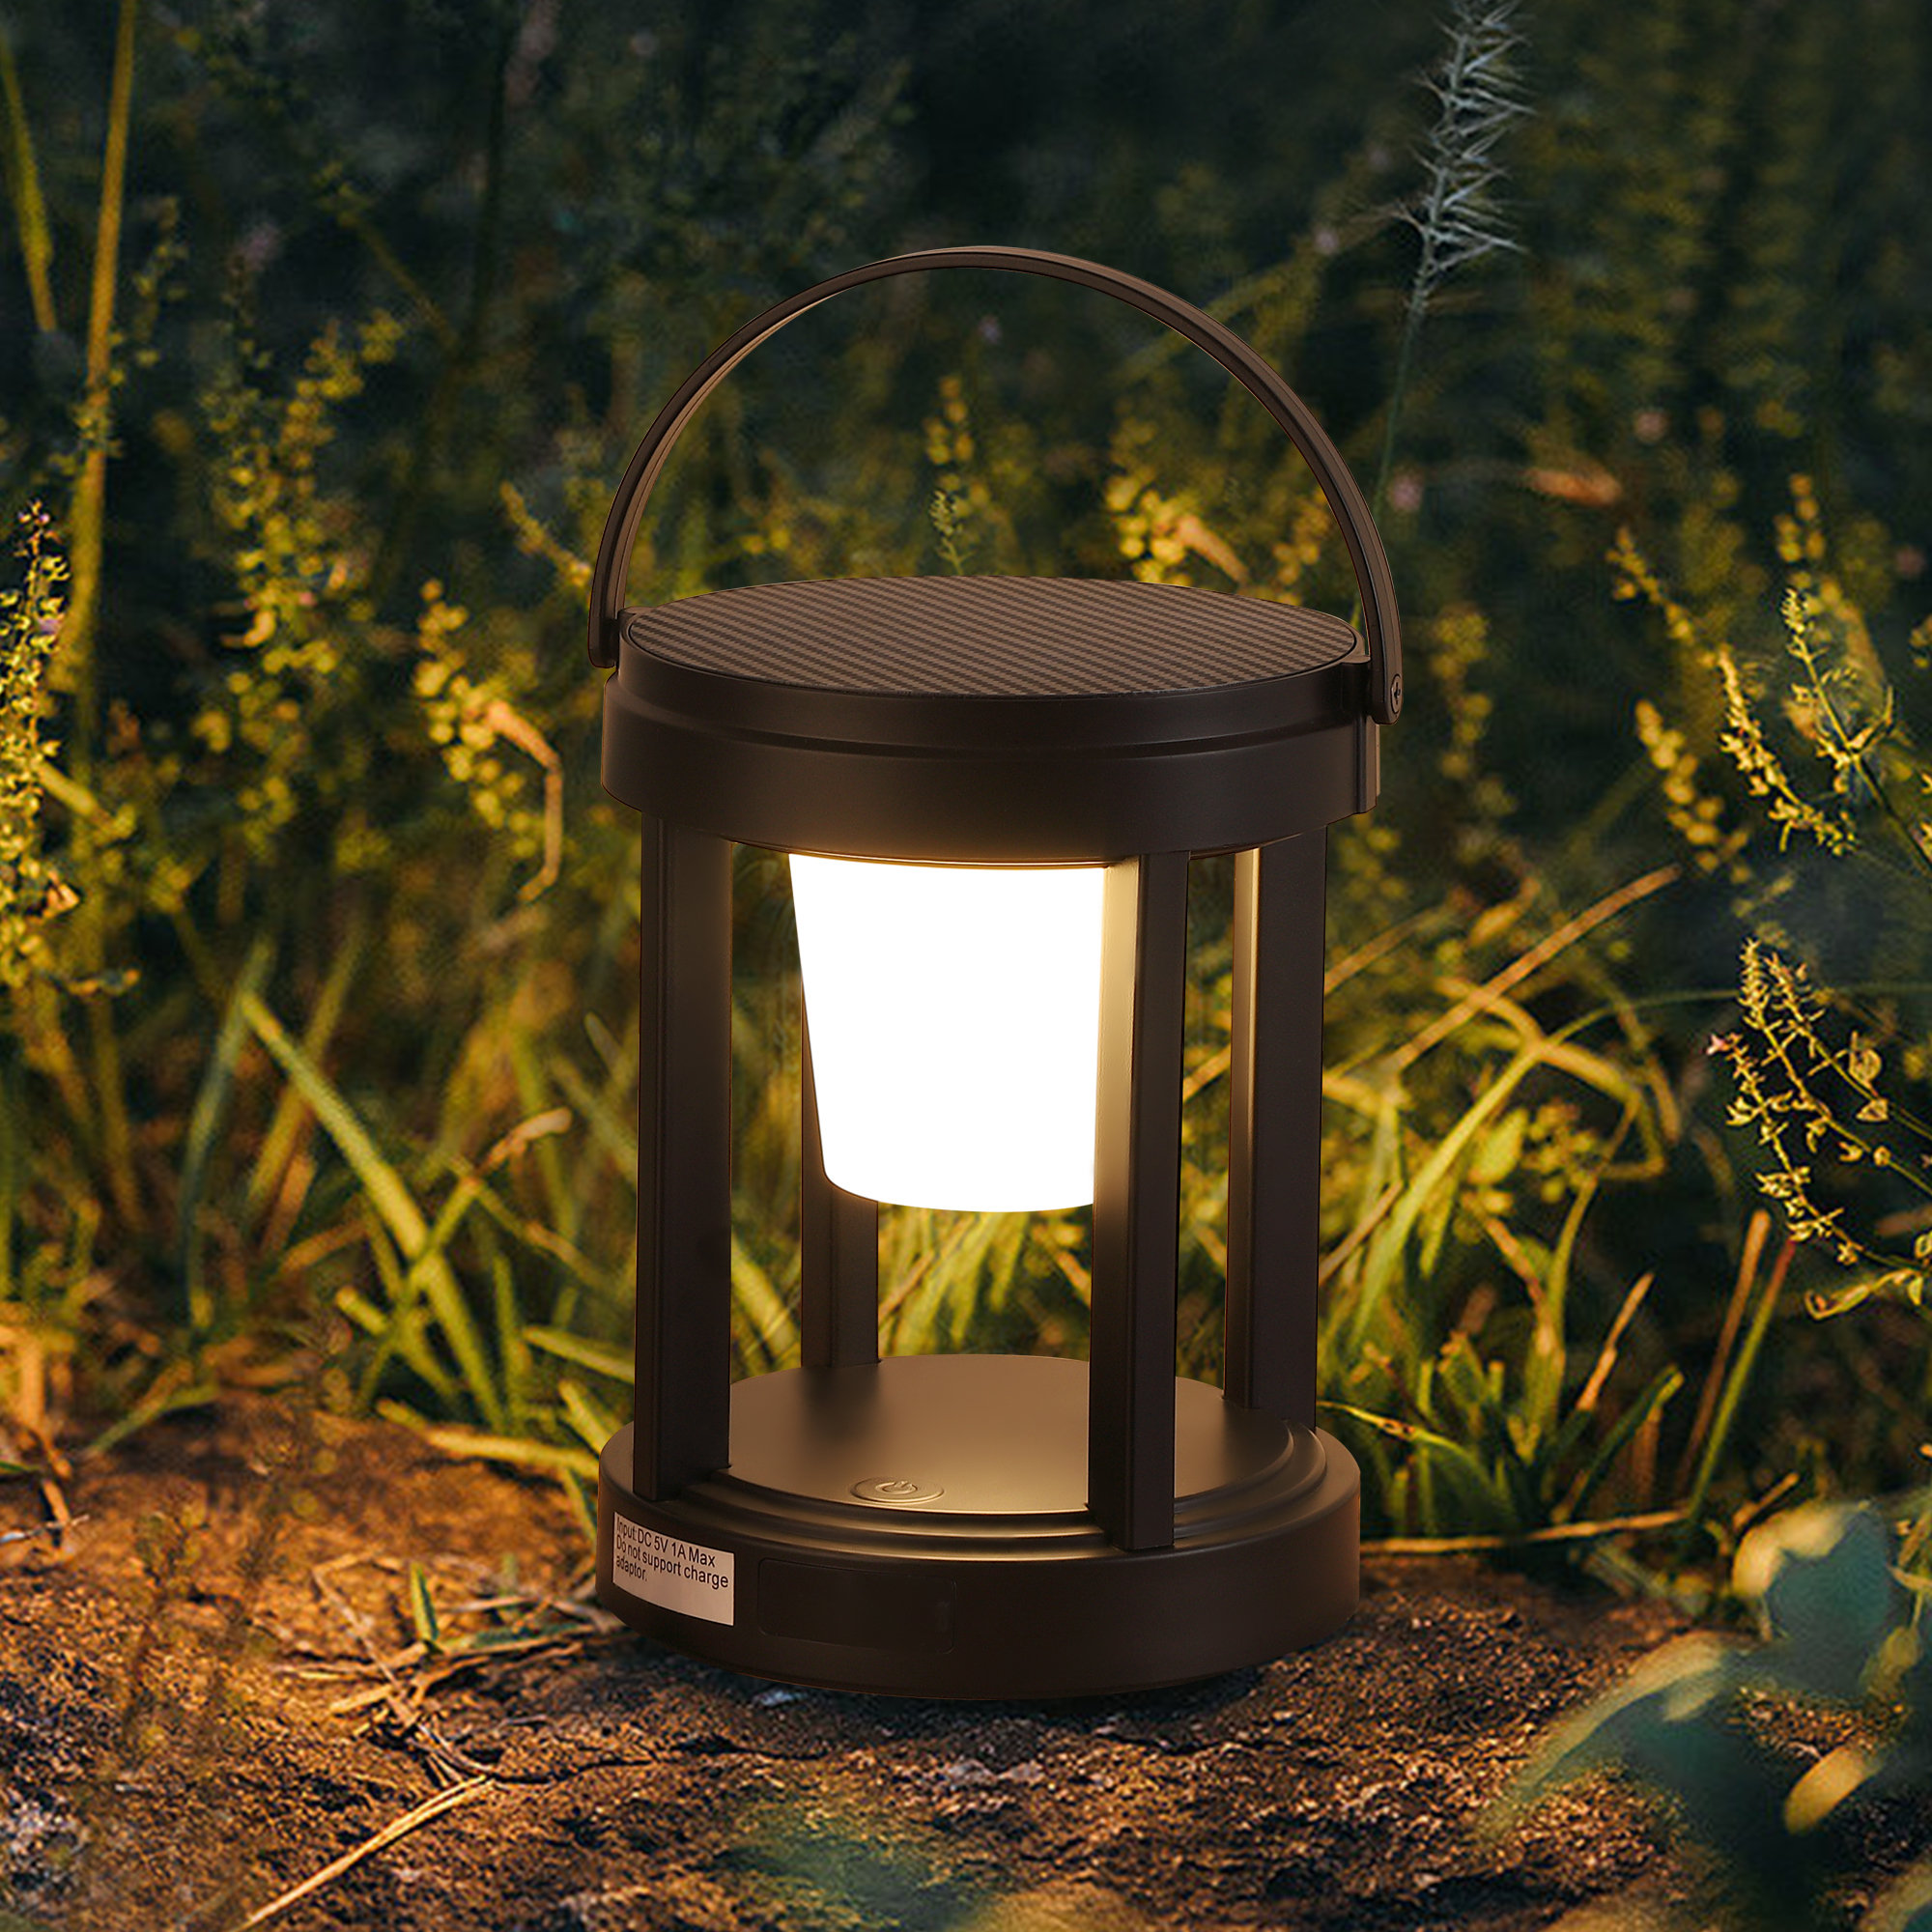 Solar Powered LED Camping Lanterns-USB Rechargeable Emergency  Lights-Collapsible Camp Lanterns for Power Outages,Green